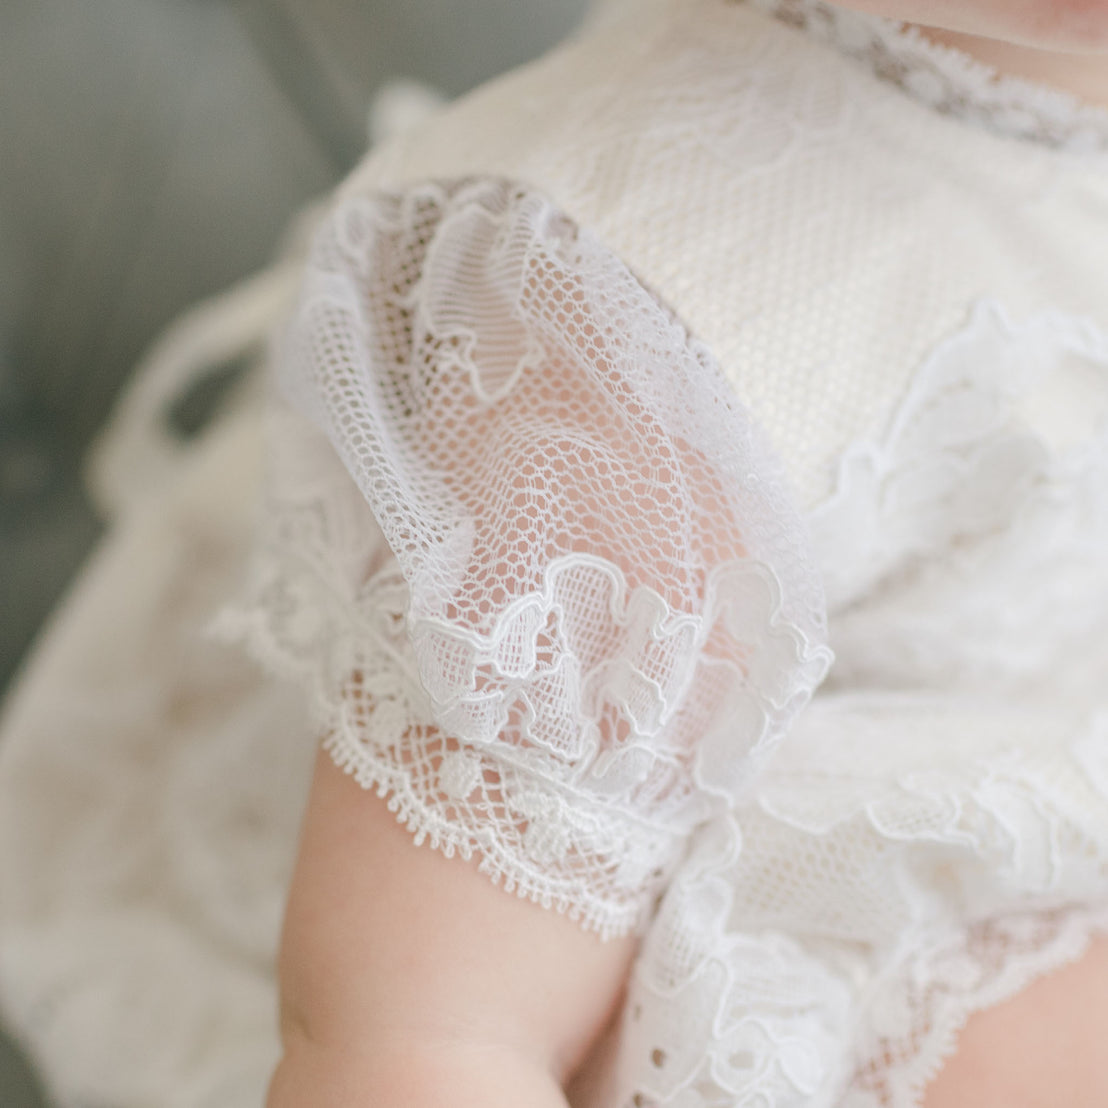 Close-up of the embroidered white floral lace detail on the sleeve of an Aria Bubble Romper, showcasing delicate patterns and textures.